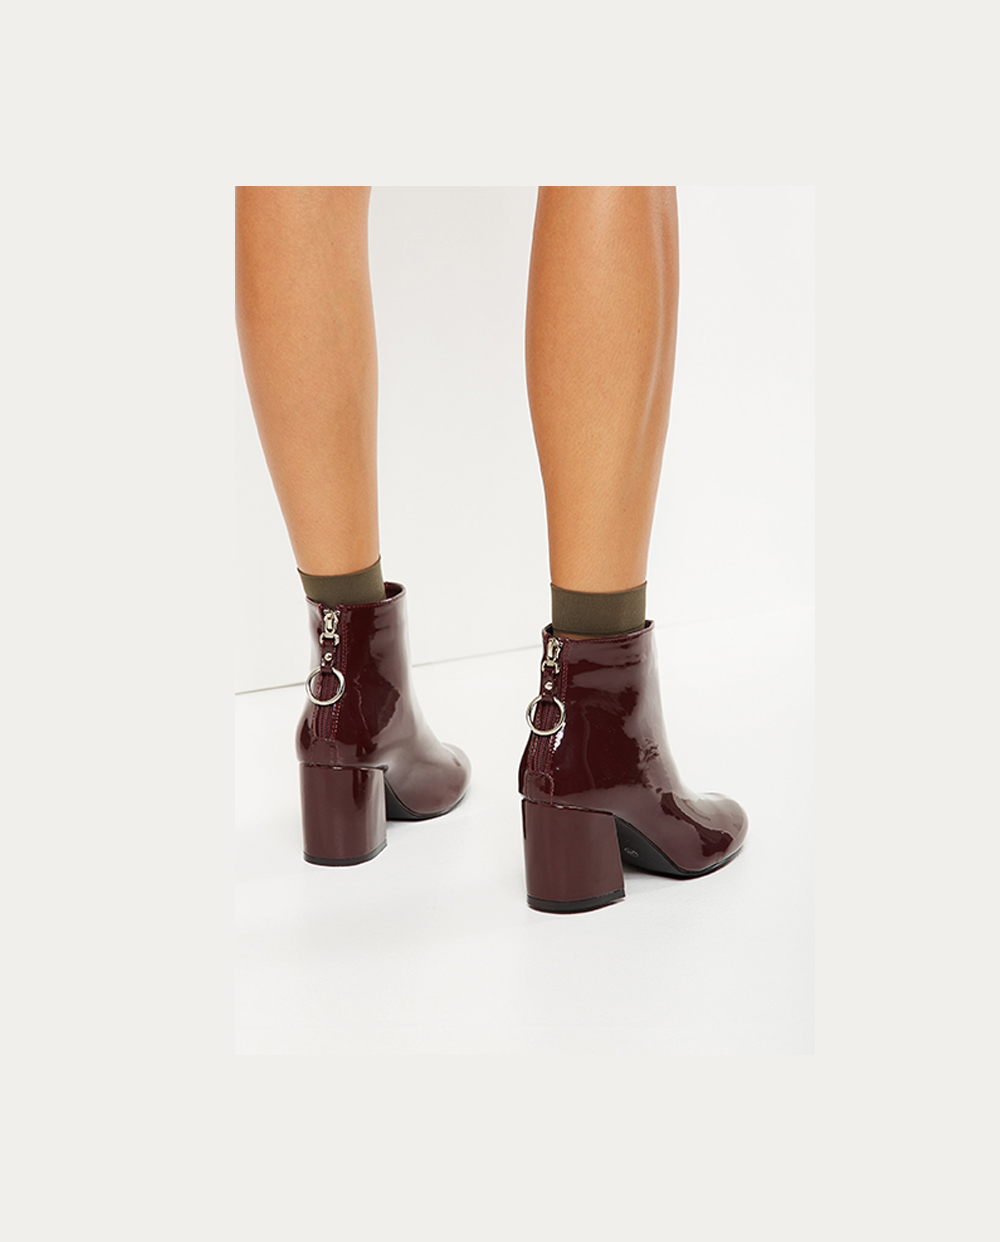 30+ Items We Can't Believe Are On Sale Right Now And We're #AddingToCart | Elise Ring Boot, $25 (was $54.95) from Cotton On